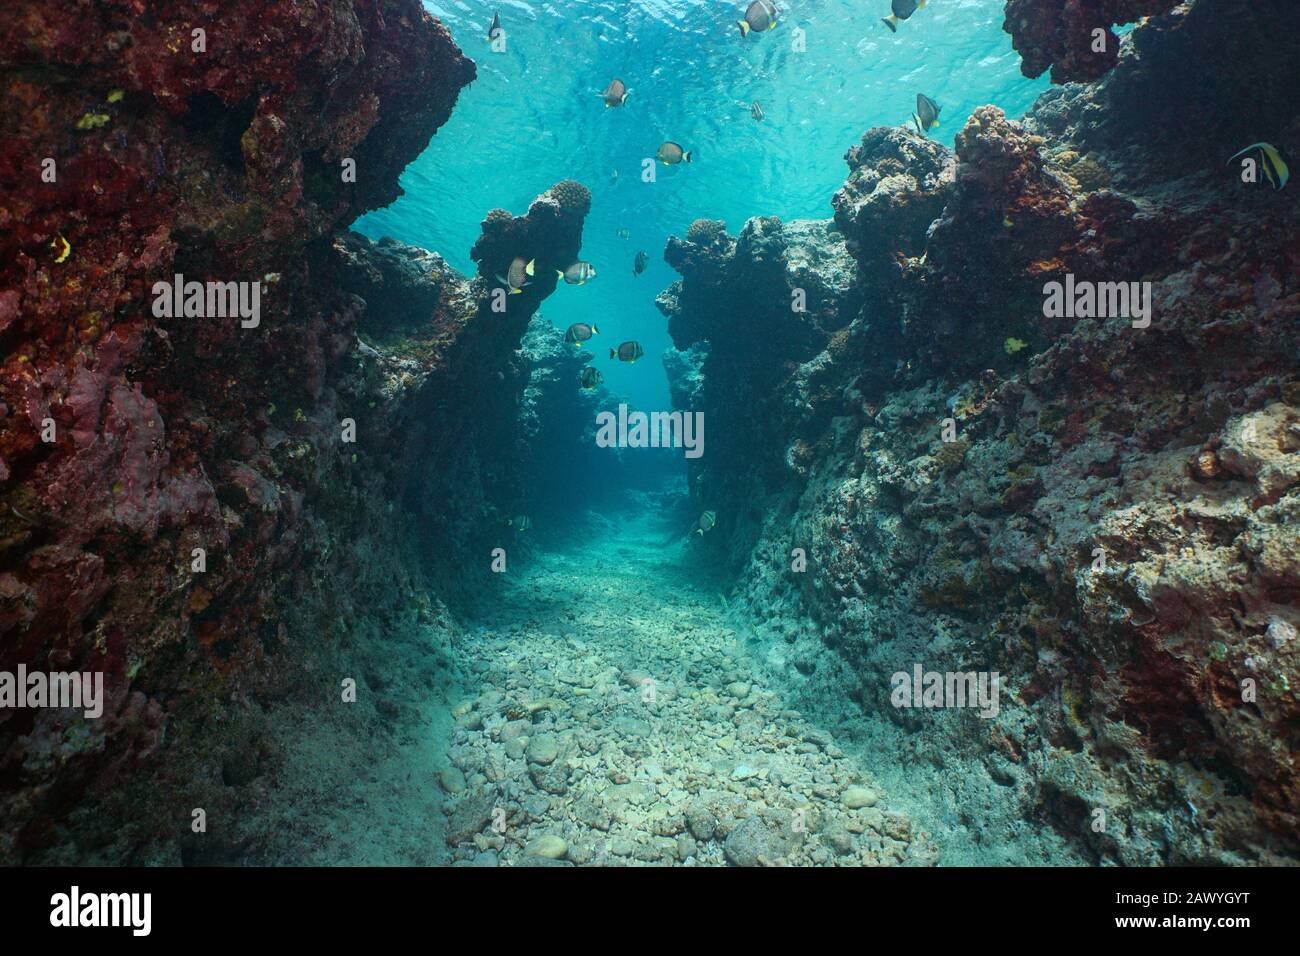 Underwater seascape, a narrow trench with some fish in a rocky reef eroded by the swell, Pacific ocean, French Polynesia, Oceania Stock Photo